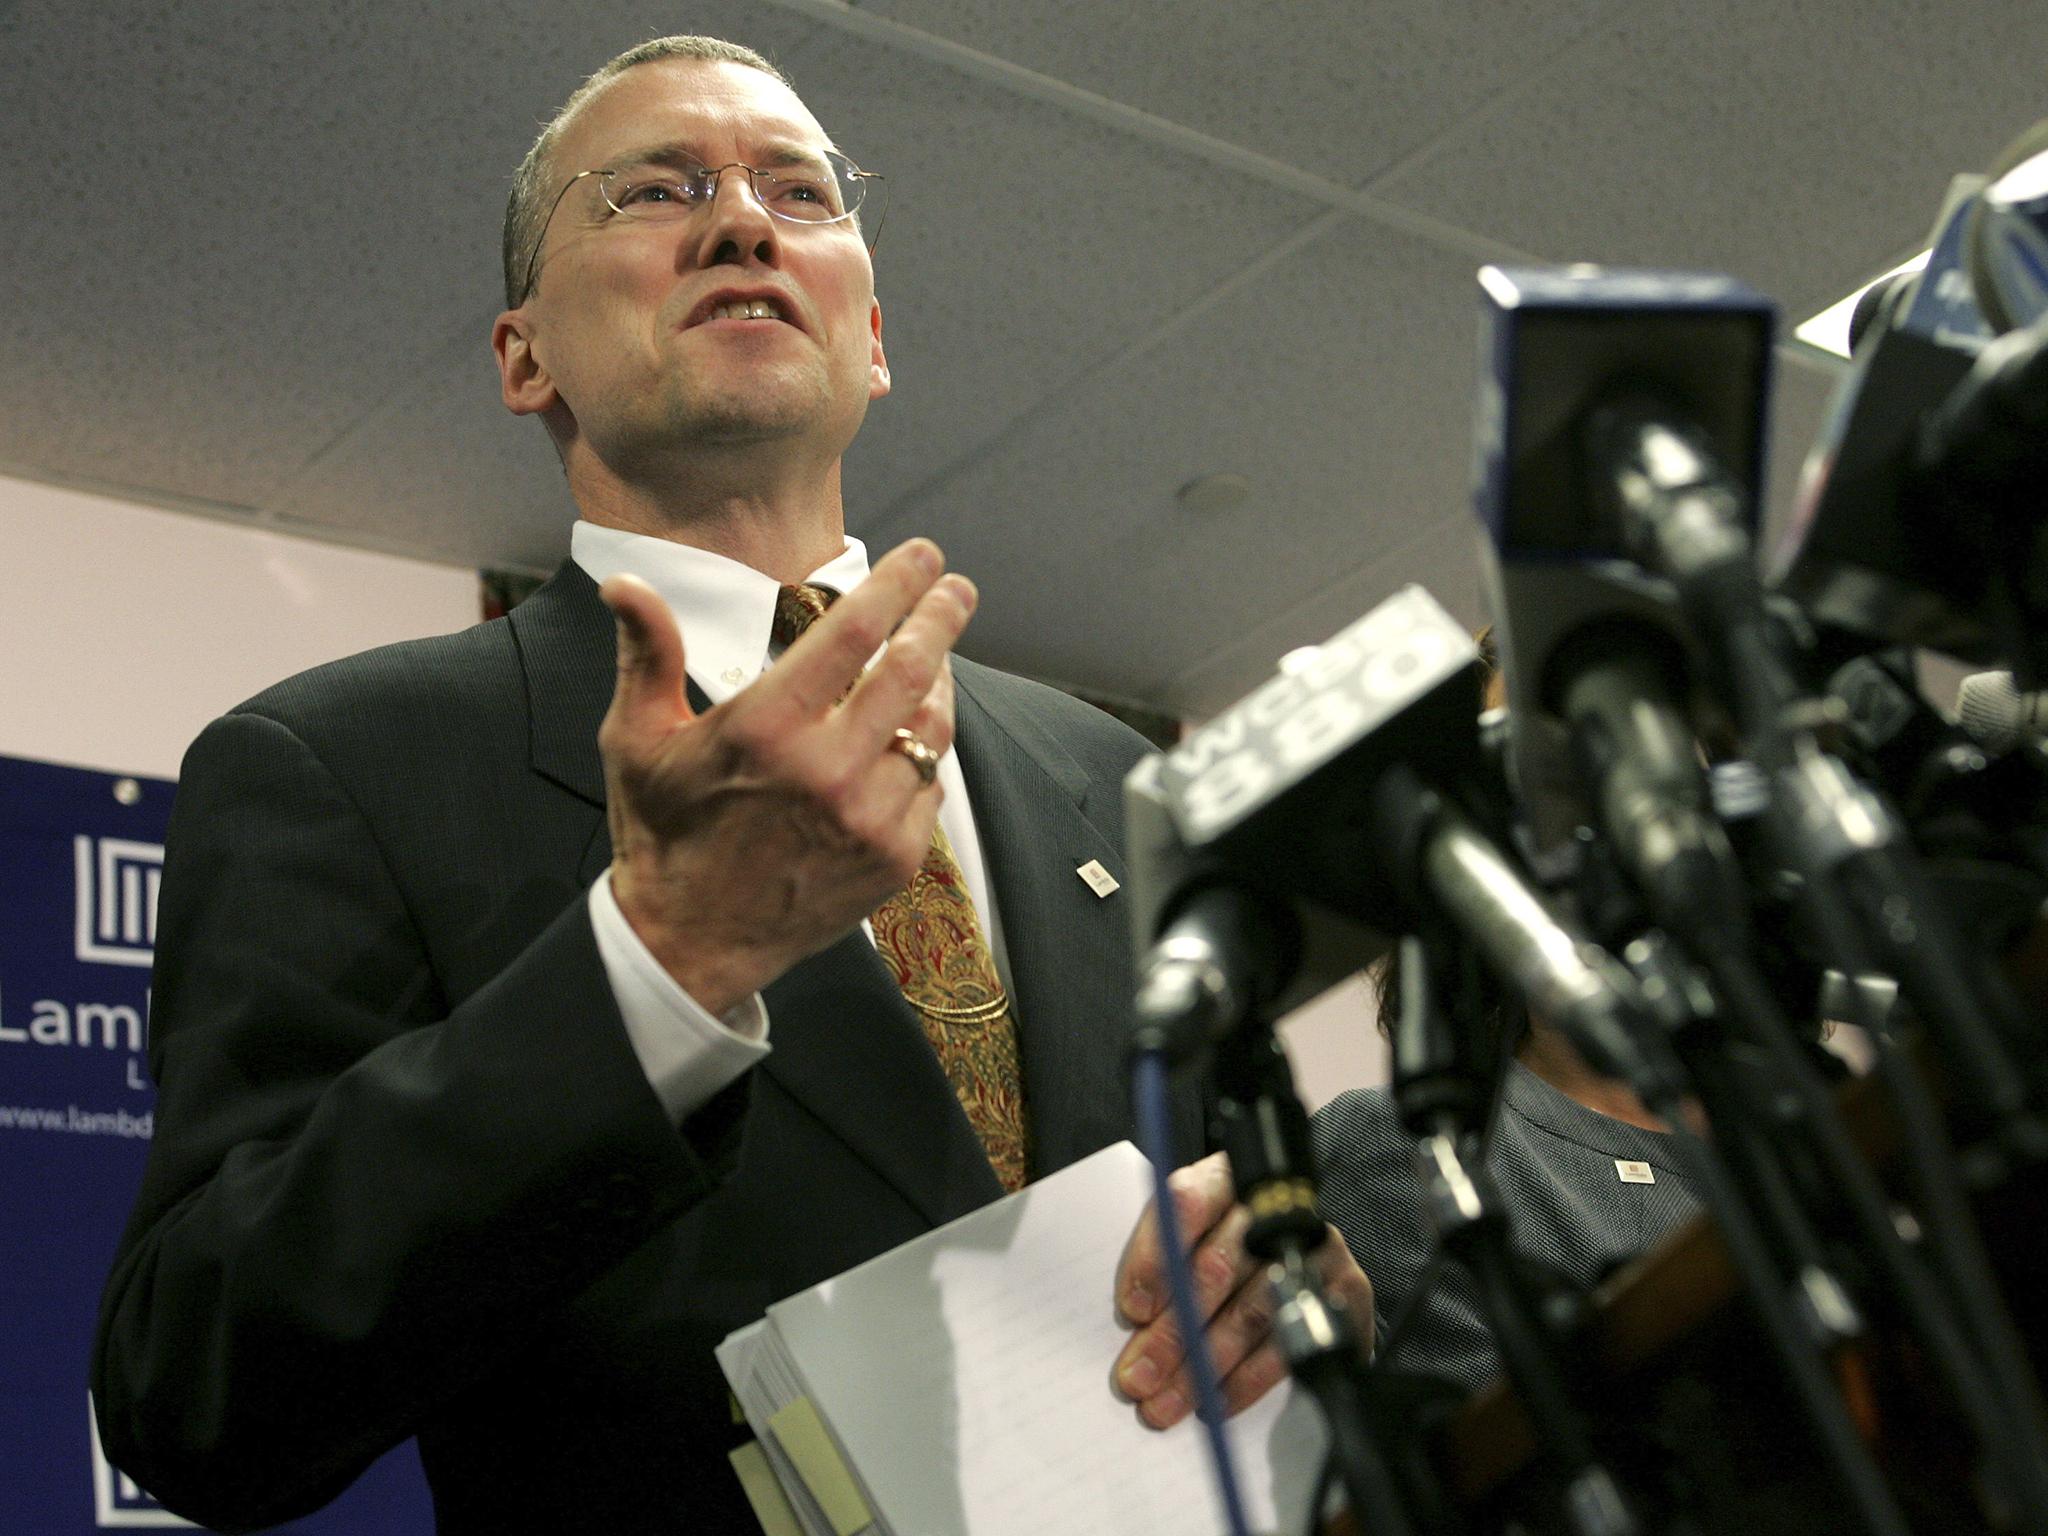 David Buckel speaking during a case in 2008 at a press conference about marriage equality